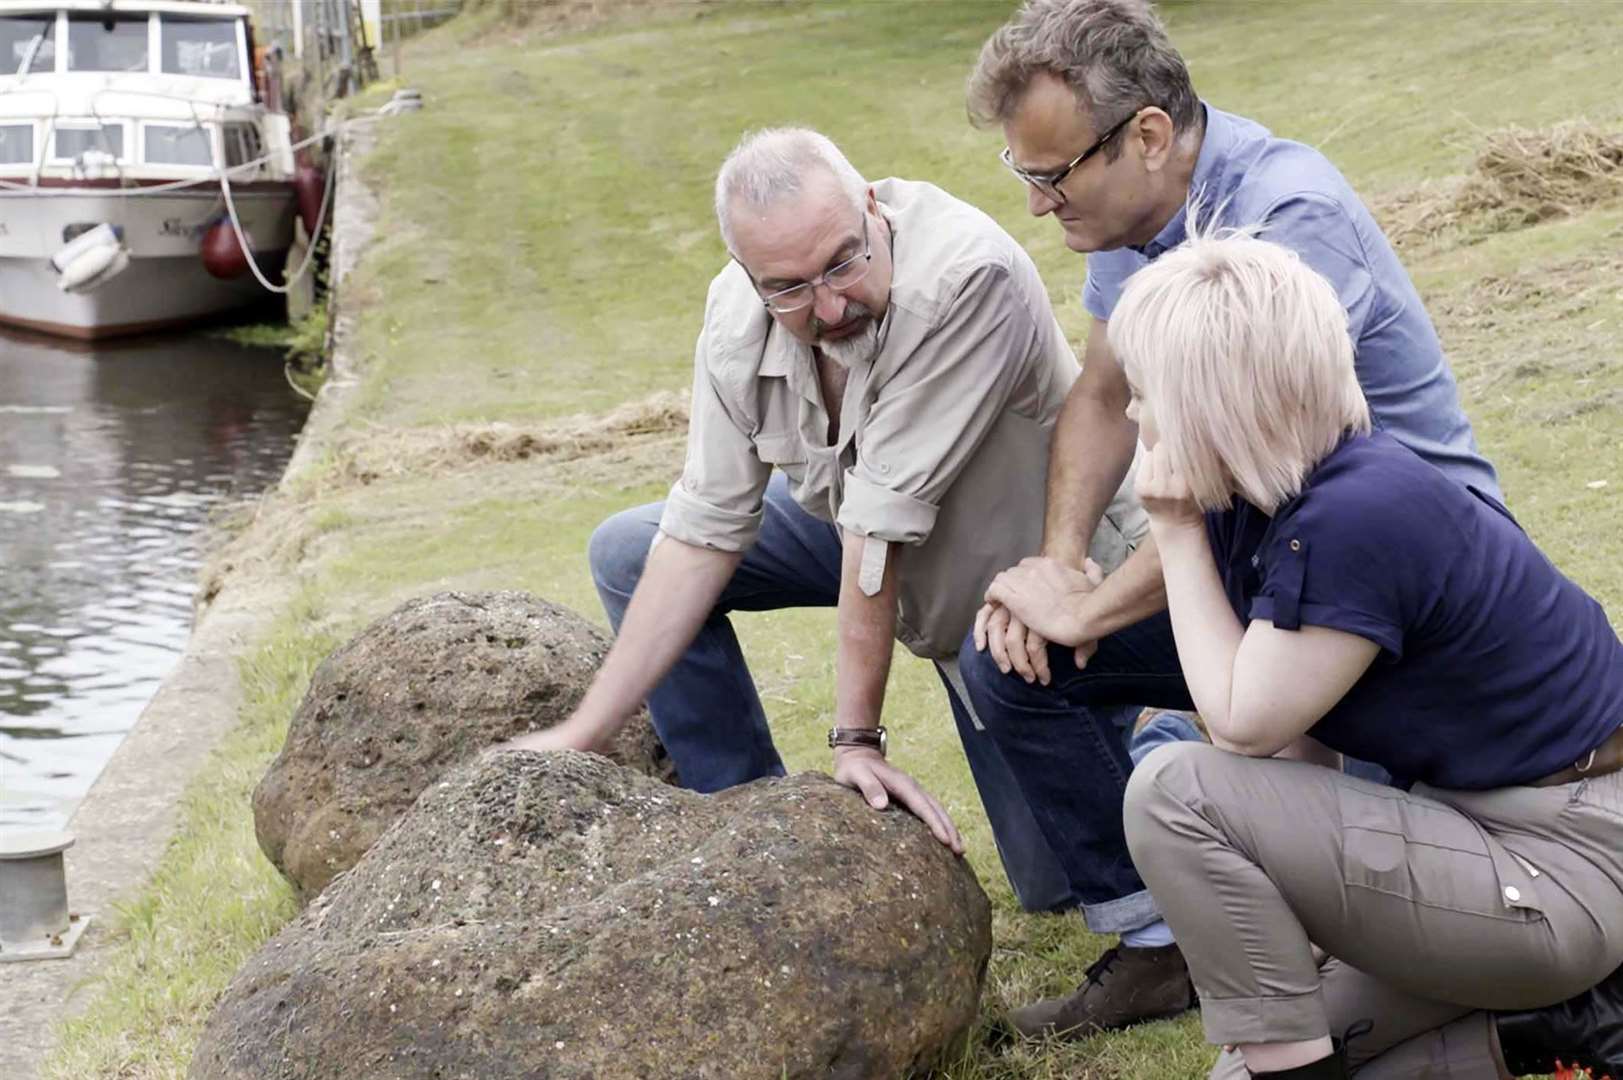 Hugh Dennis, archaeologists and historians descended upon a Maidstone street for an episode of The Great British Dig: History in your Back Garden Picture: Channel 4